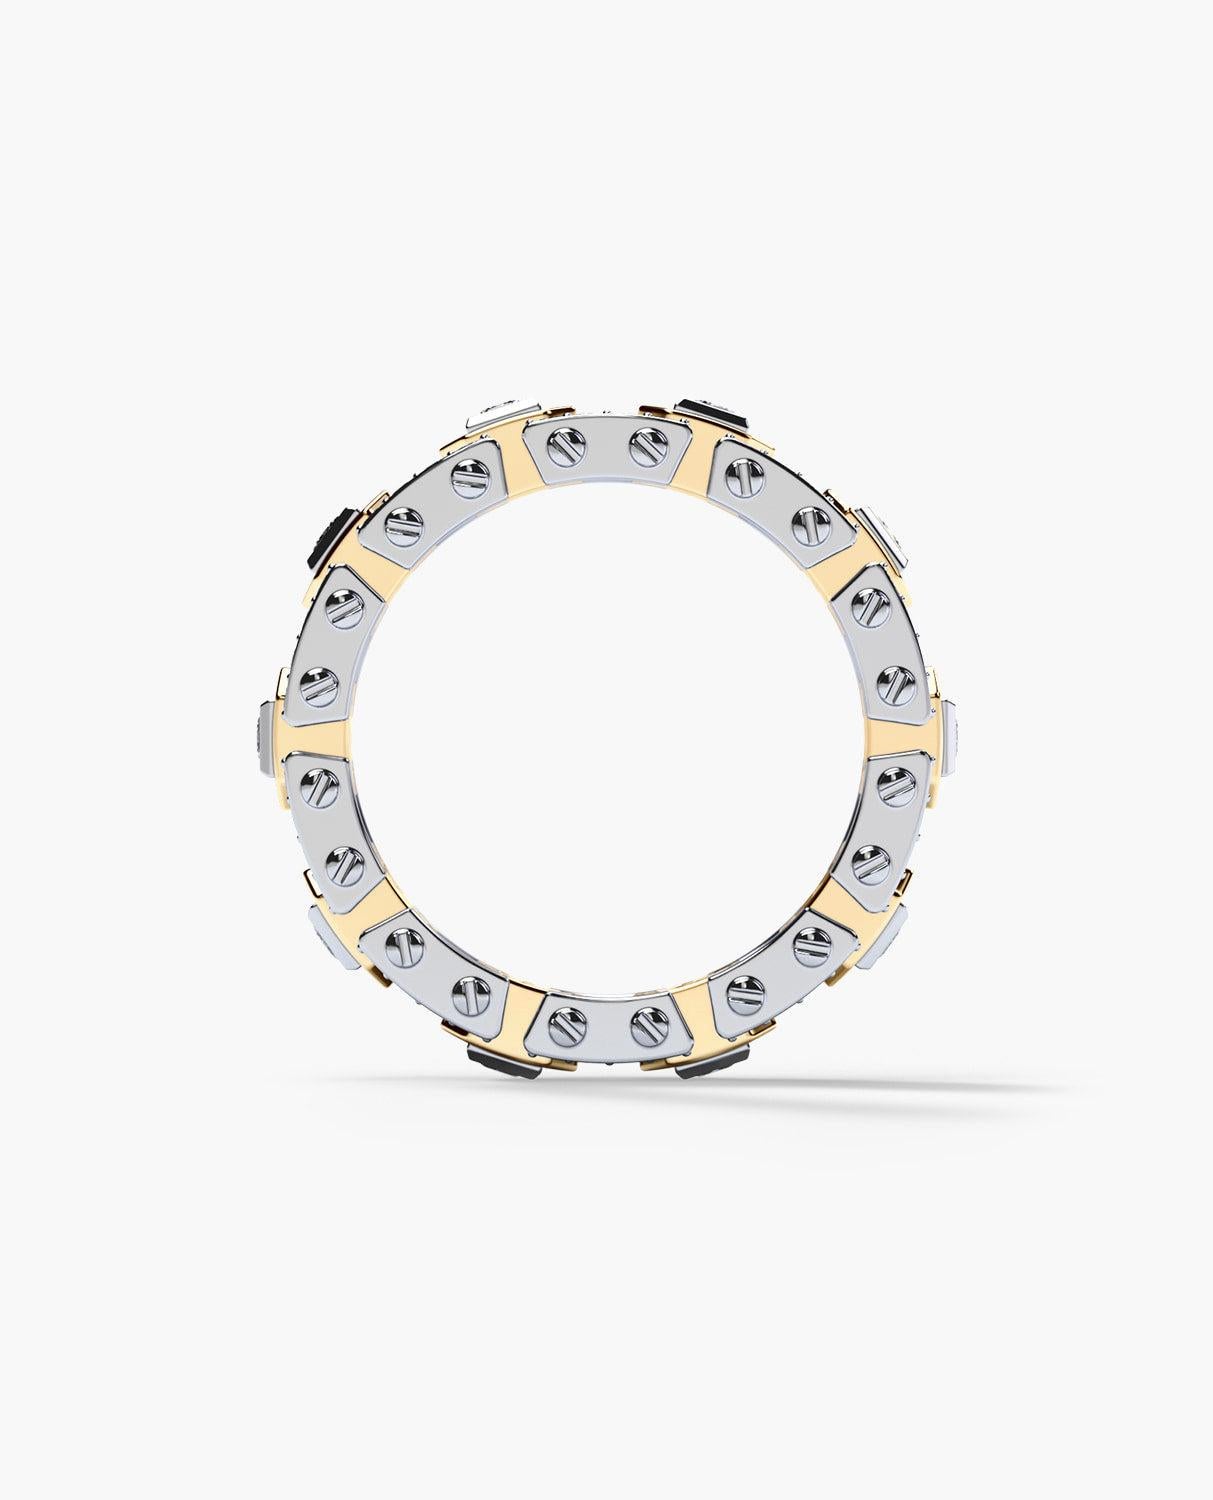 Contemporary LA PAZ 14k White & Yellow Gold Ring with 1.20ct Diamonds For Sale